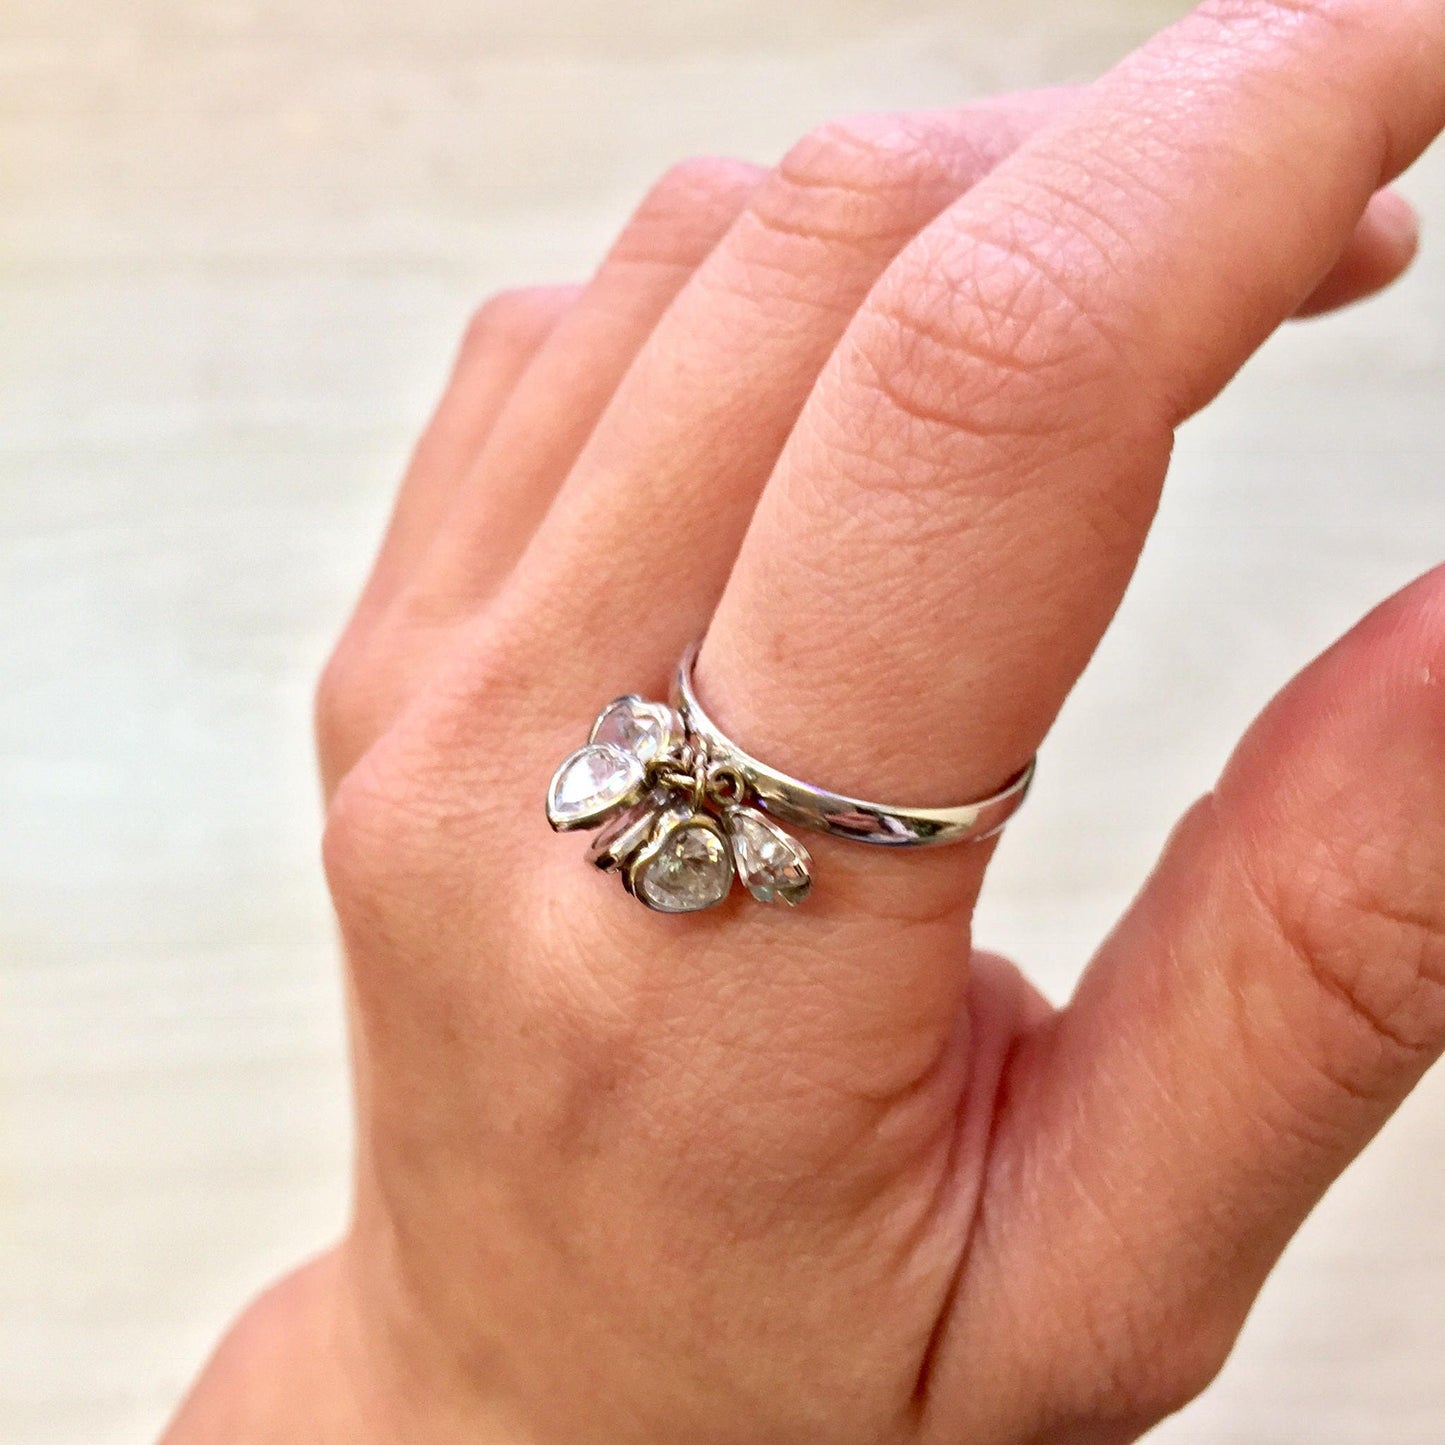 14K white gold ring with dangling cubic zirconia heart charms on a person's finger, perfect holiday gift idea for her